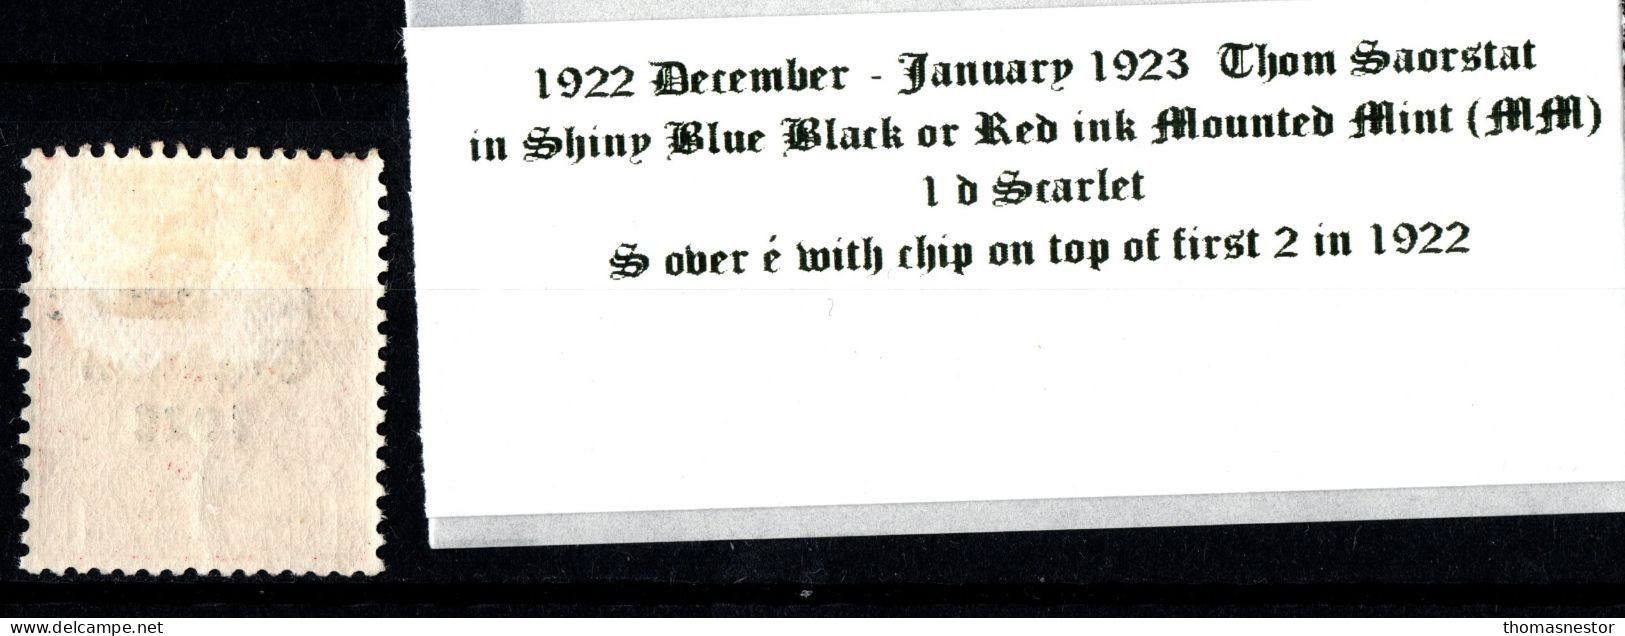 1922 - 1923 Dec-Jan Thom Saorstát In Shiny Blue Black Or Red Ink With S Over é, 1 D Scarlet, Mounted Mint (MM) - Nuevos